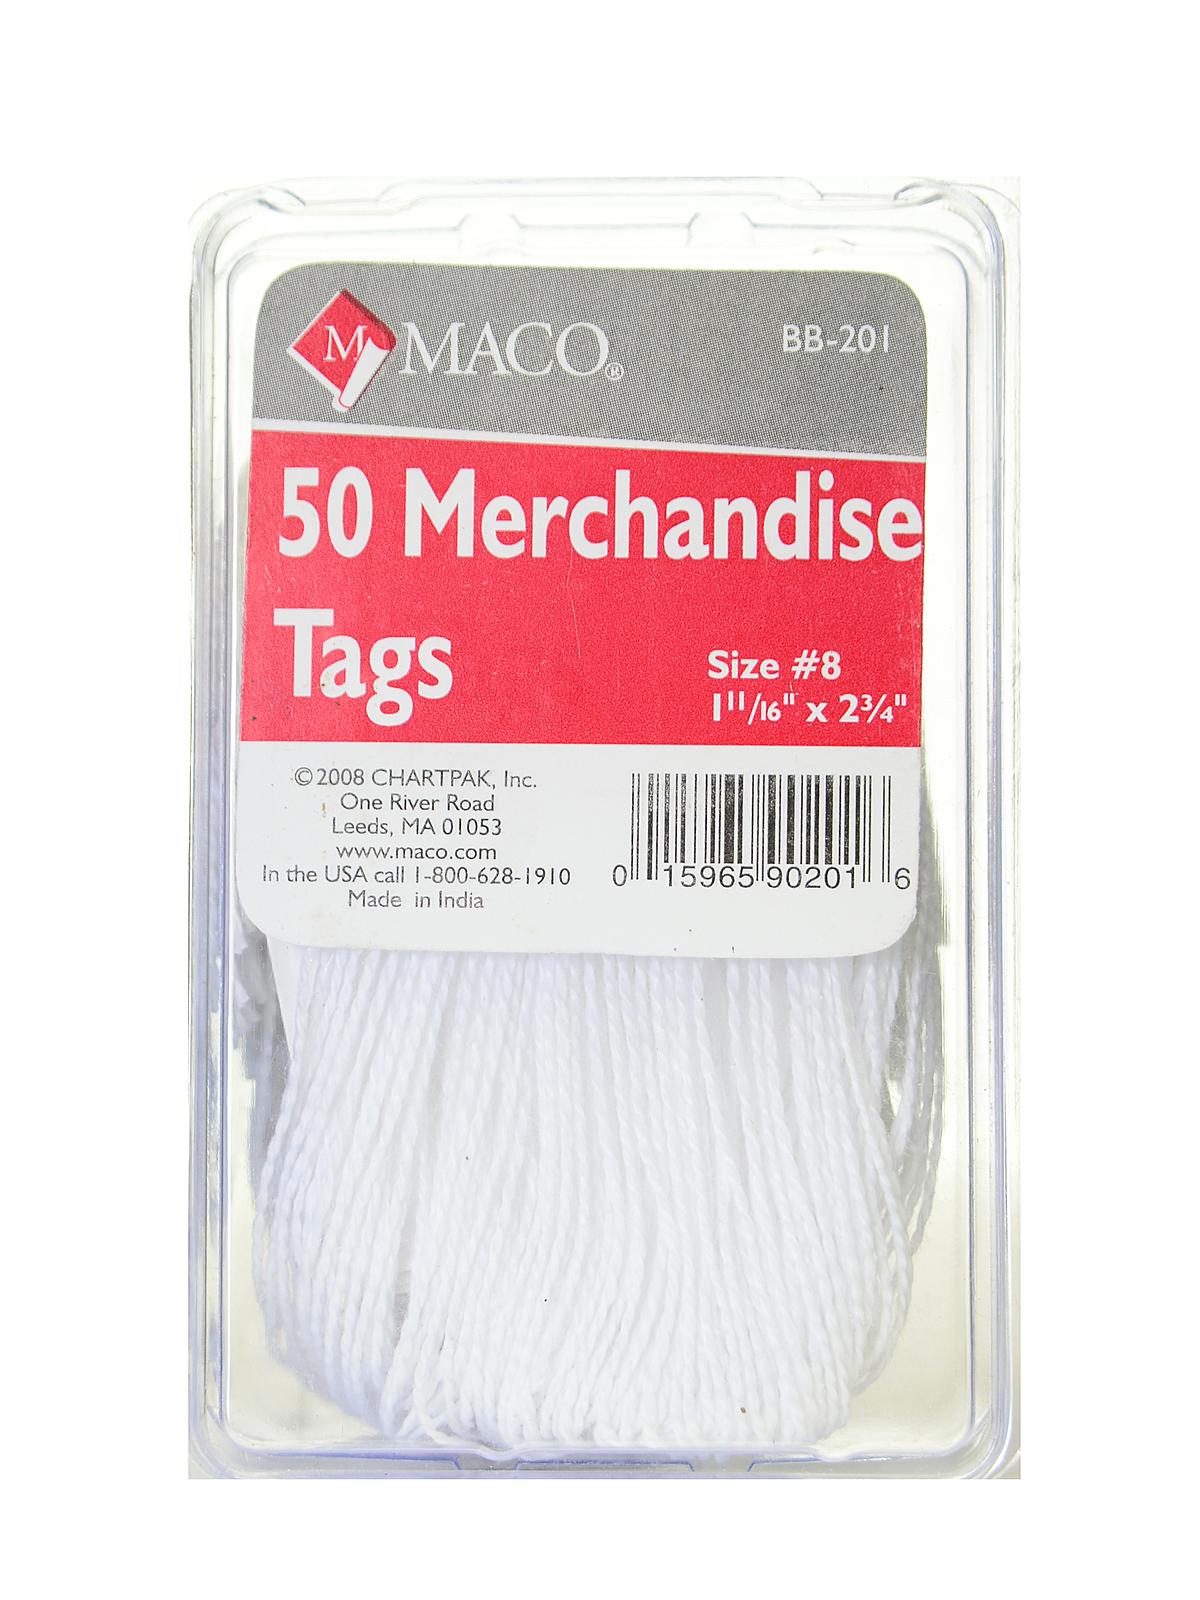 Merchandise Tags 1 11 16 In. X 2 3 4 In. Pack Of 50